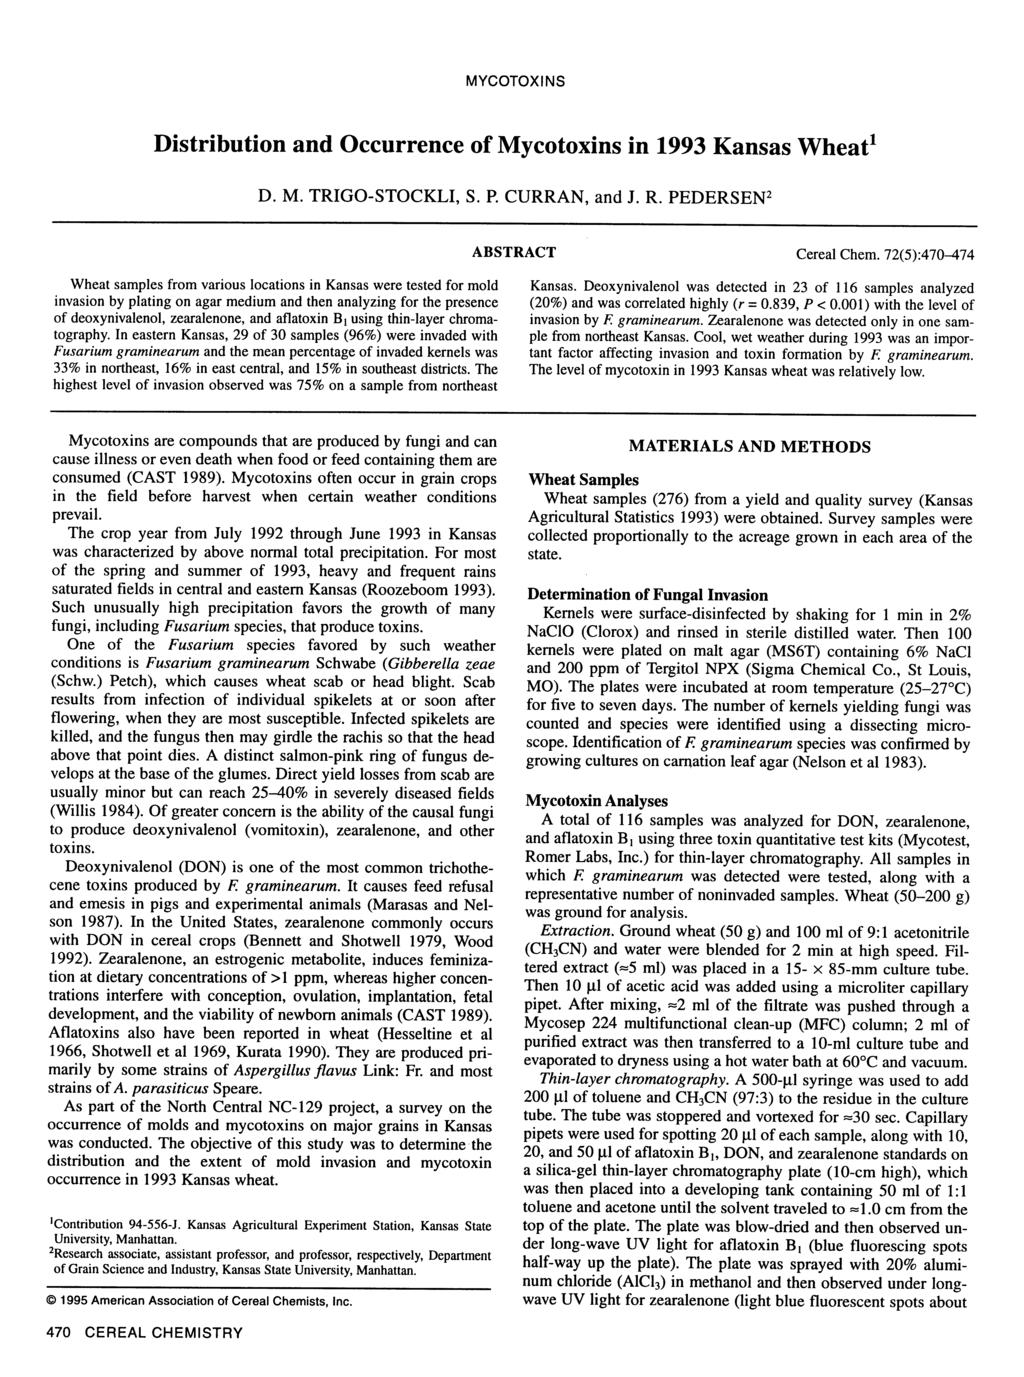 MYCOTOXNS Distribution and Occurrence of Mycotoxins in 1993 Kansas Wheat' D. M. TRGO-STOCKL, S. P. CURRAN, and J. R. PEDERSEN 2 ABSTRACT Cereal Chem.